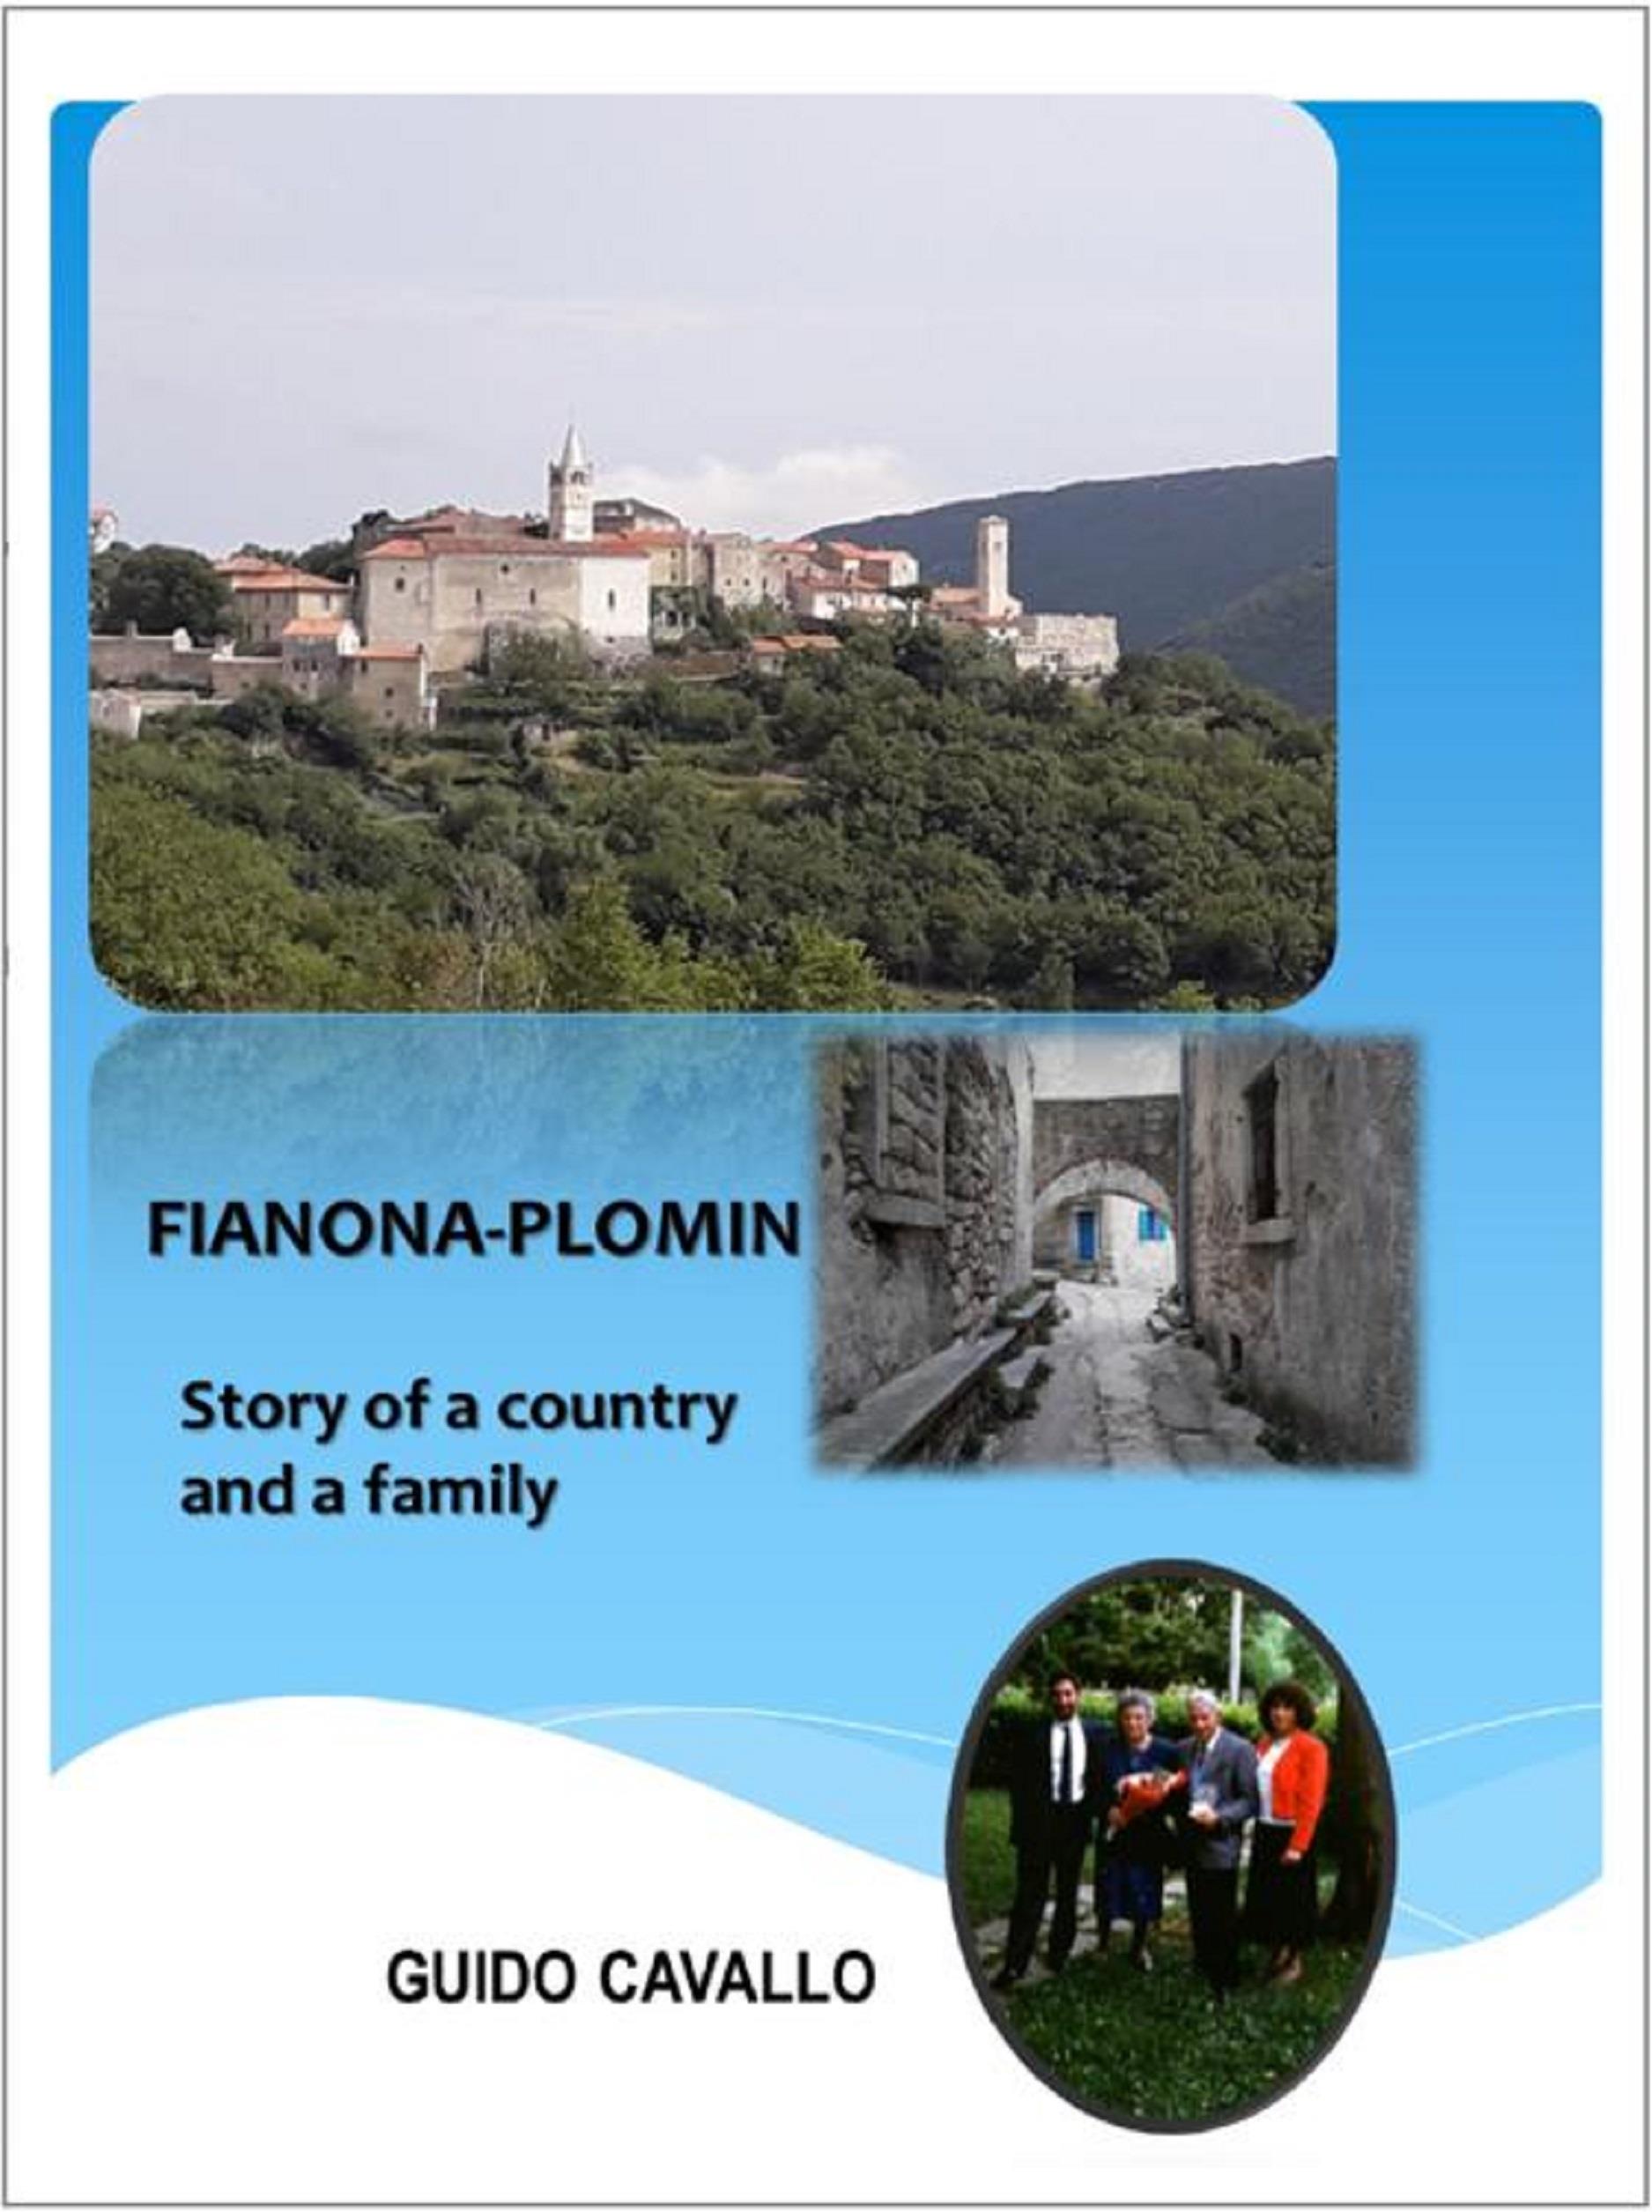 Fianona-Plomin: Story of a country and a family